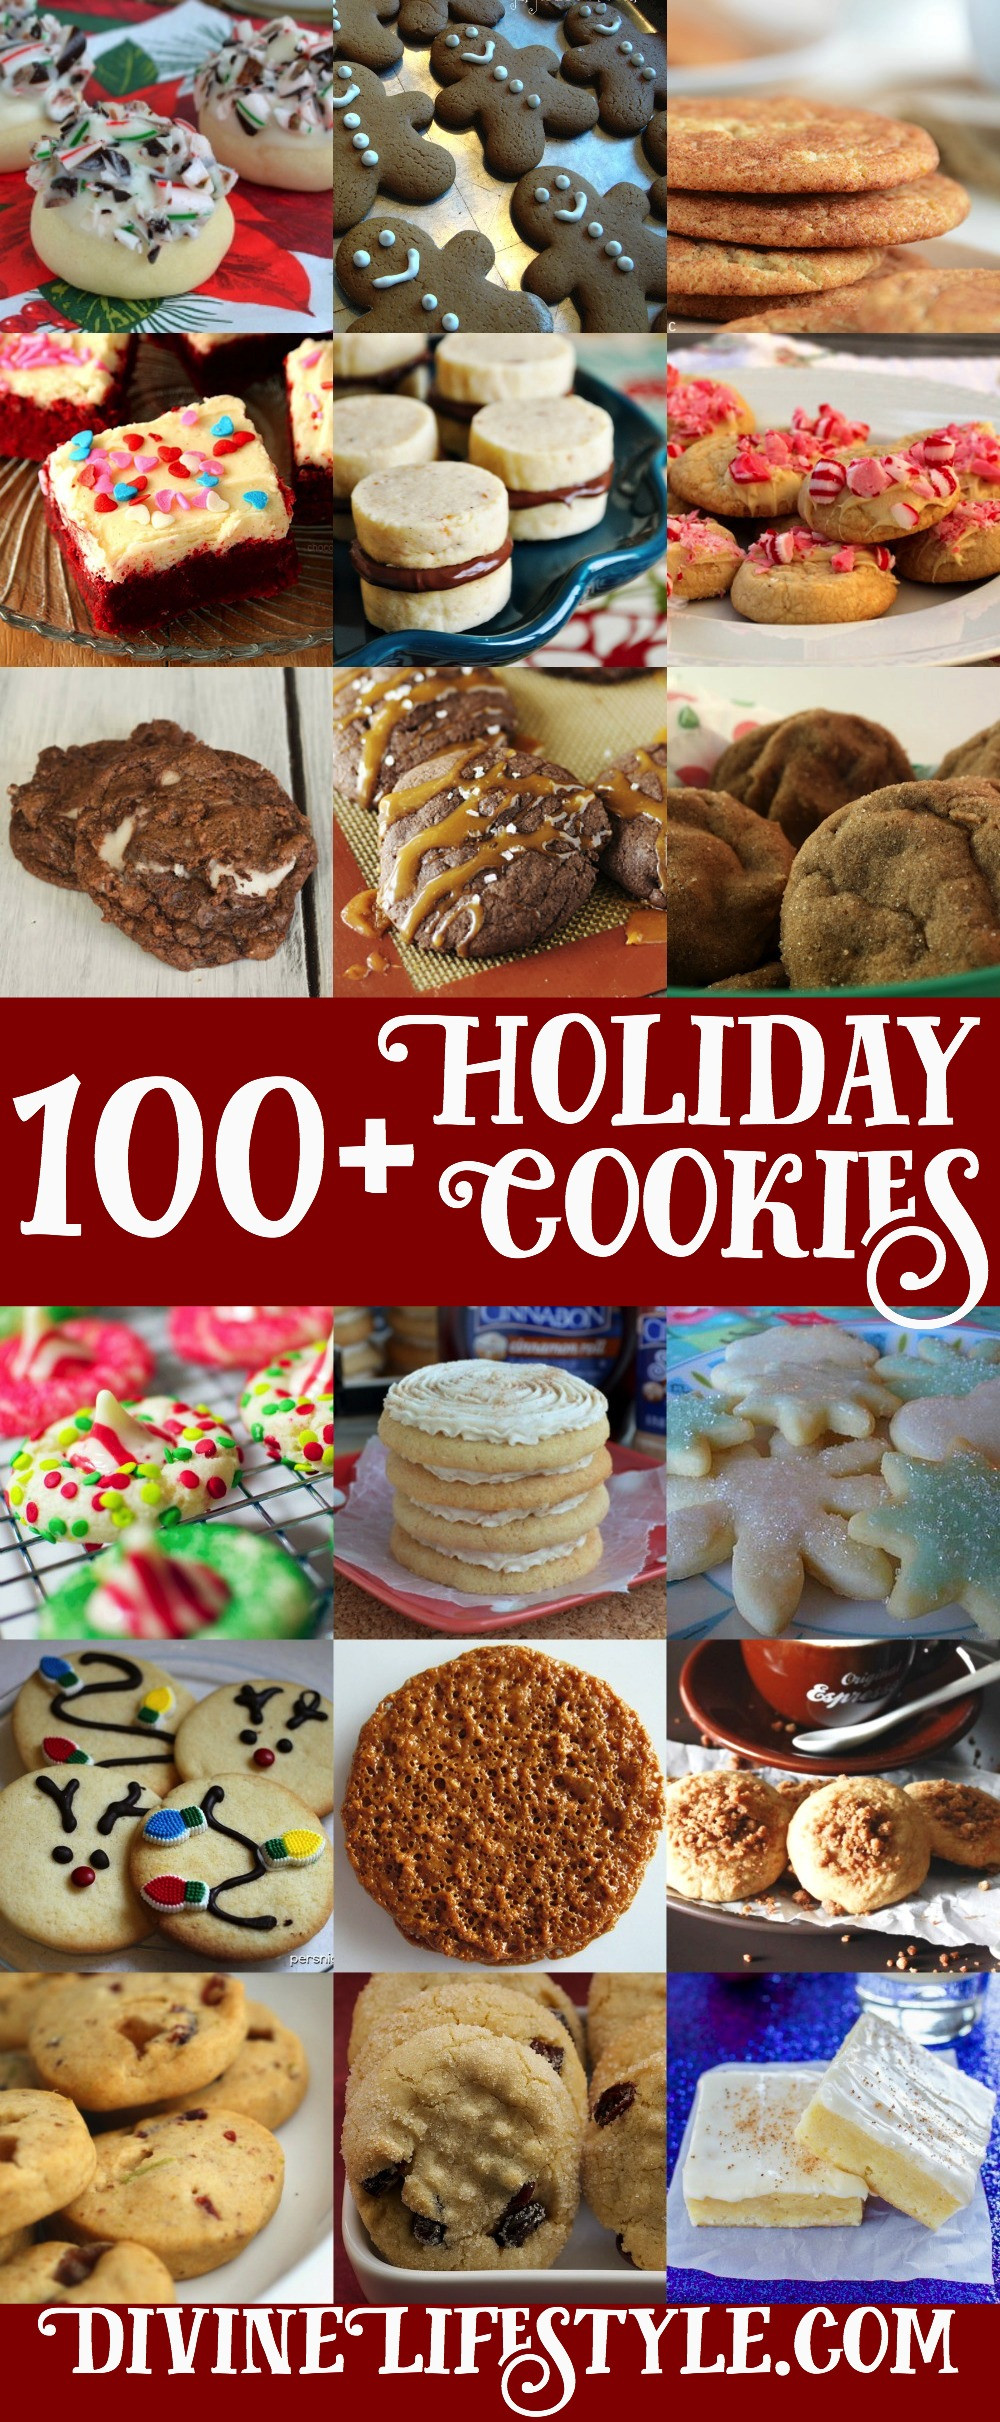 List Of Christmas Cookies
 Ultimate List of 100 Holiday Cookies Recipes